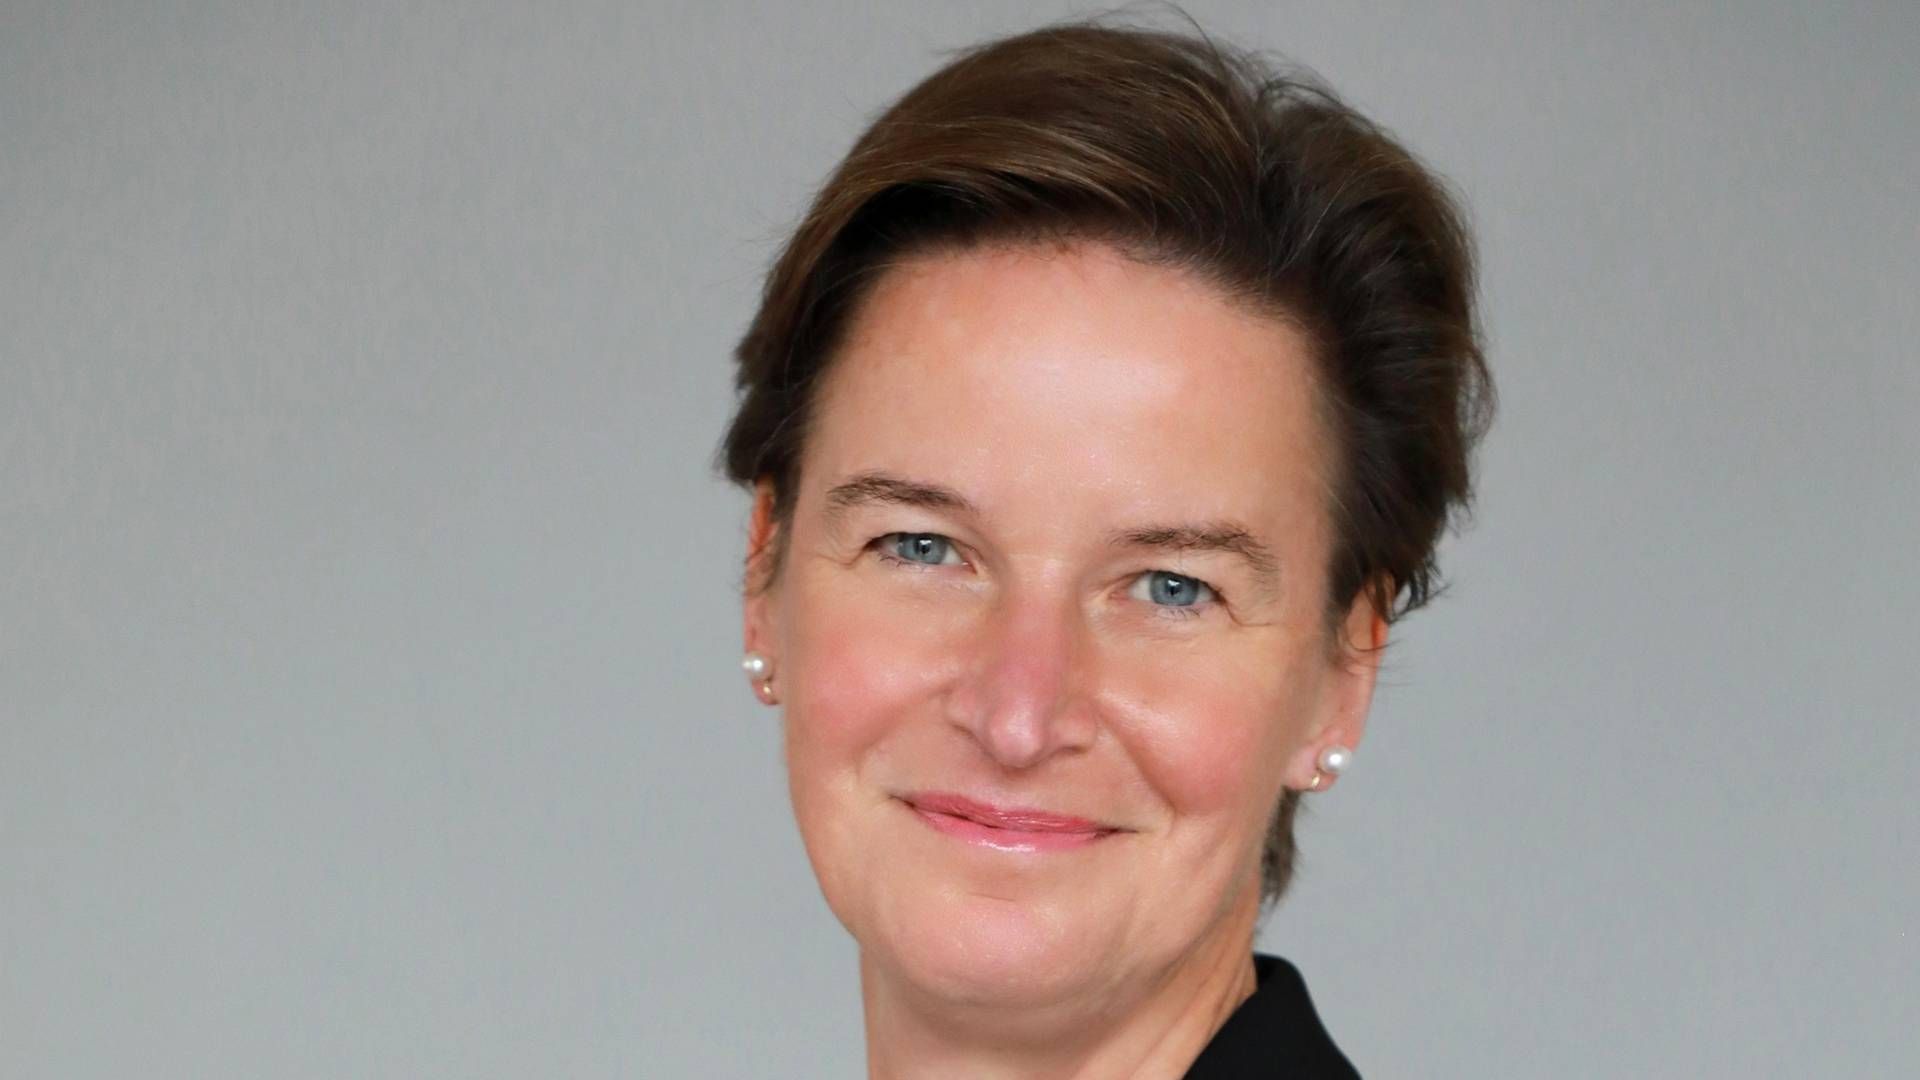 “Navigating through the many different products and offerings and understanding the differences in terms of sustainability remains extremely difficult,” said Verena Ross, chair of the European Securities and Markets Authority, in a speech published on Oct. 24. | Photo: PR / ESMA